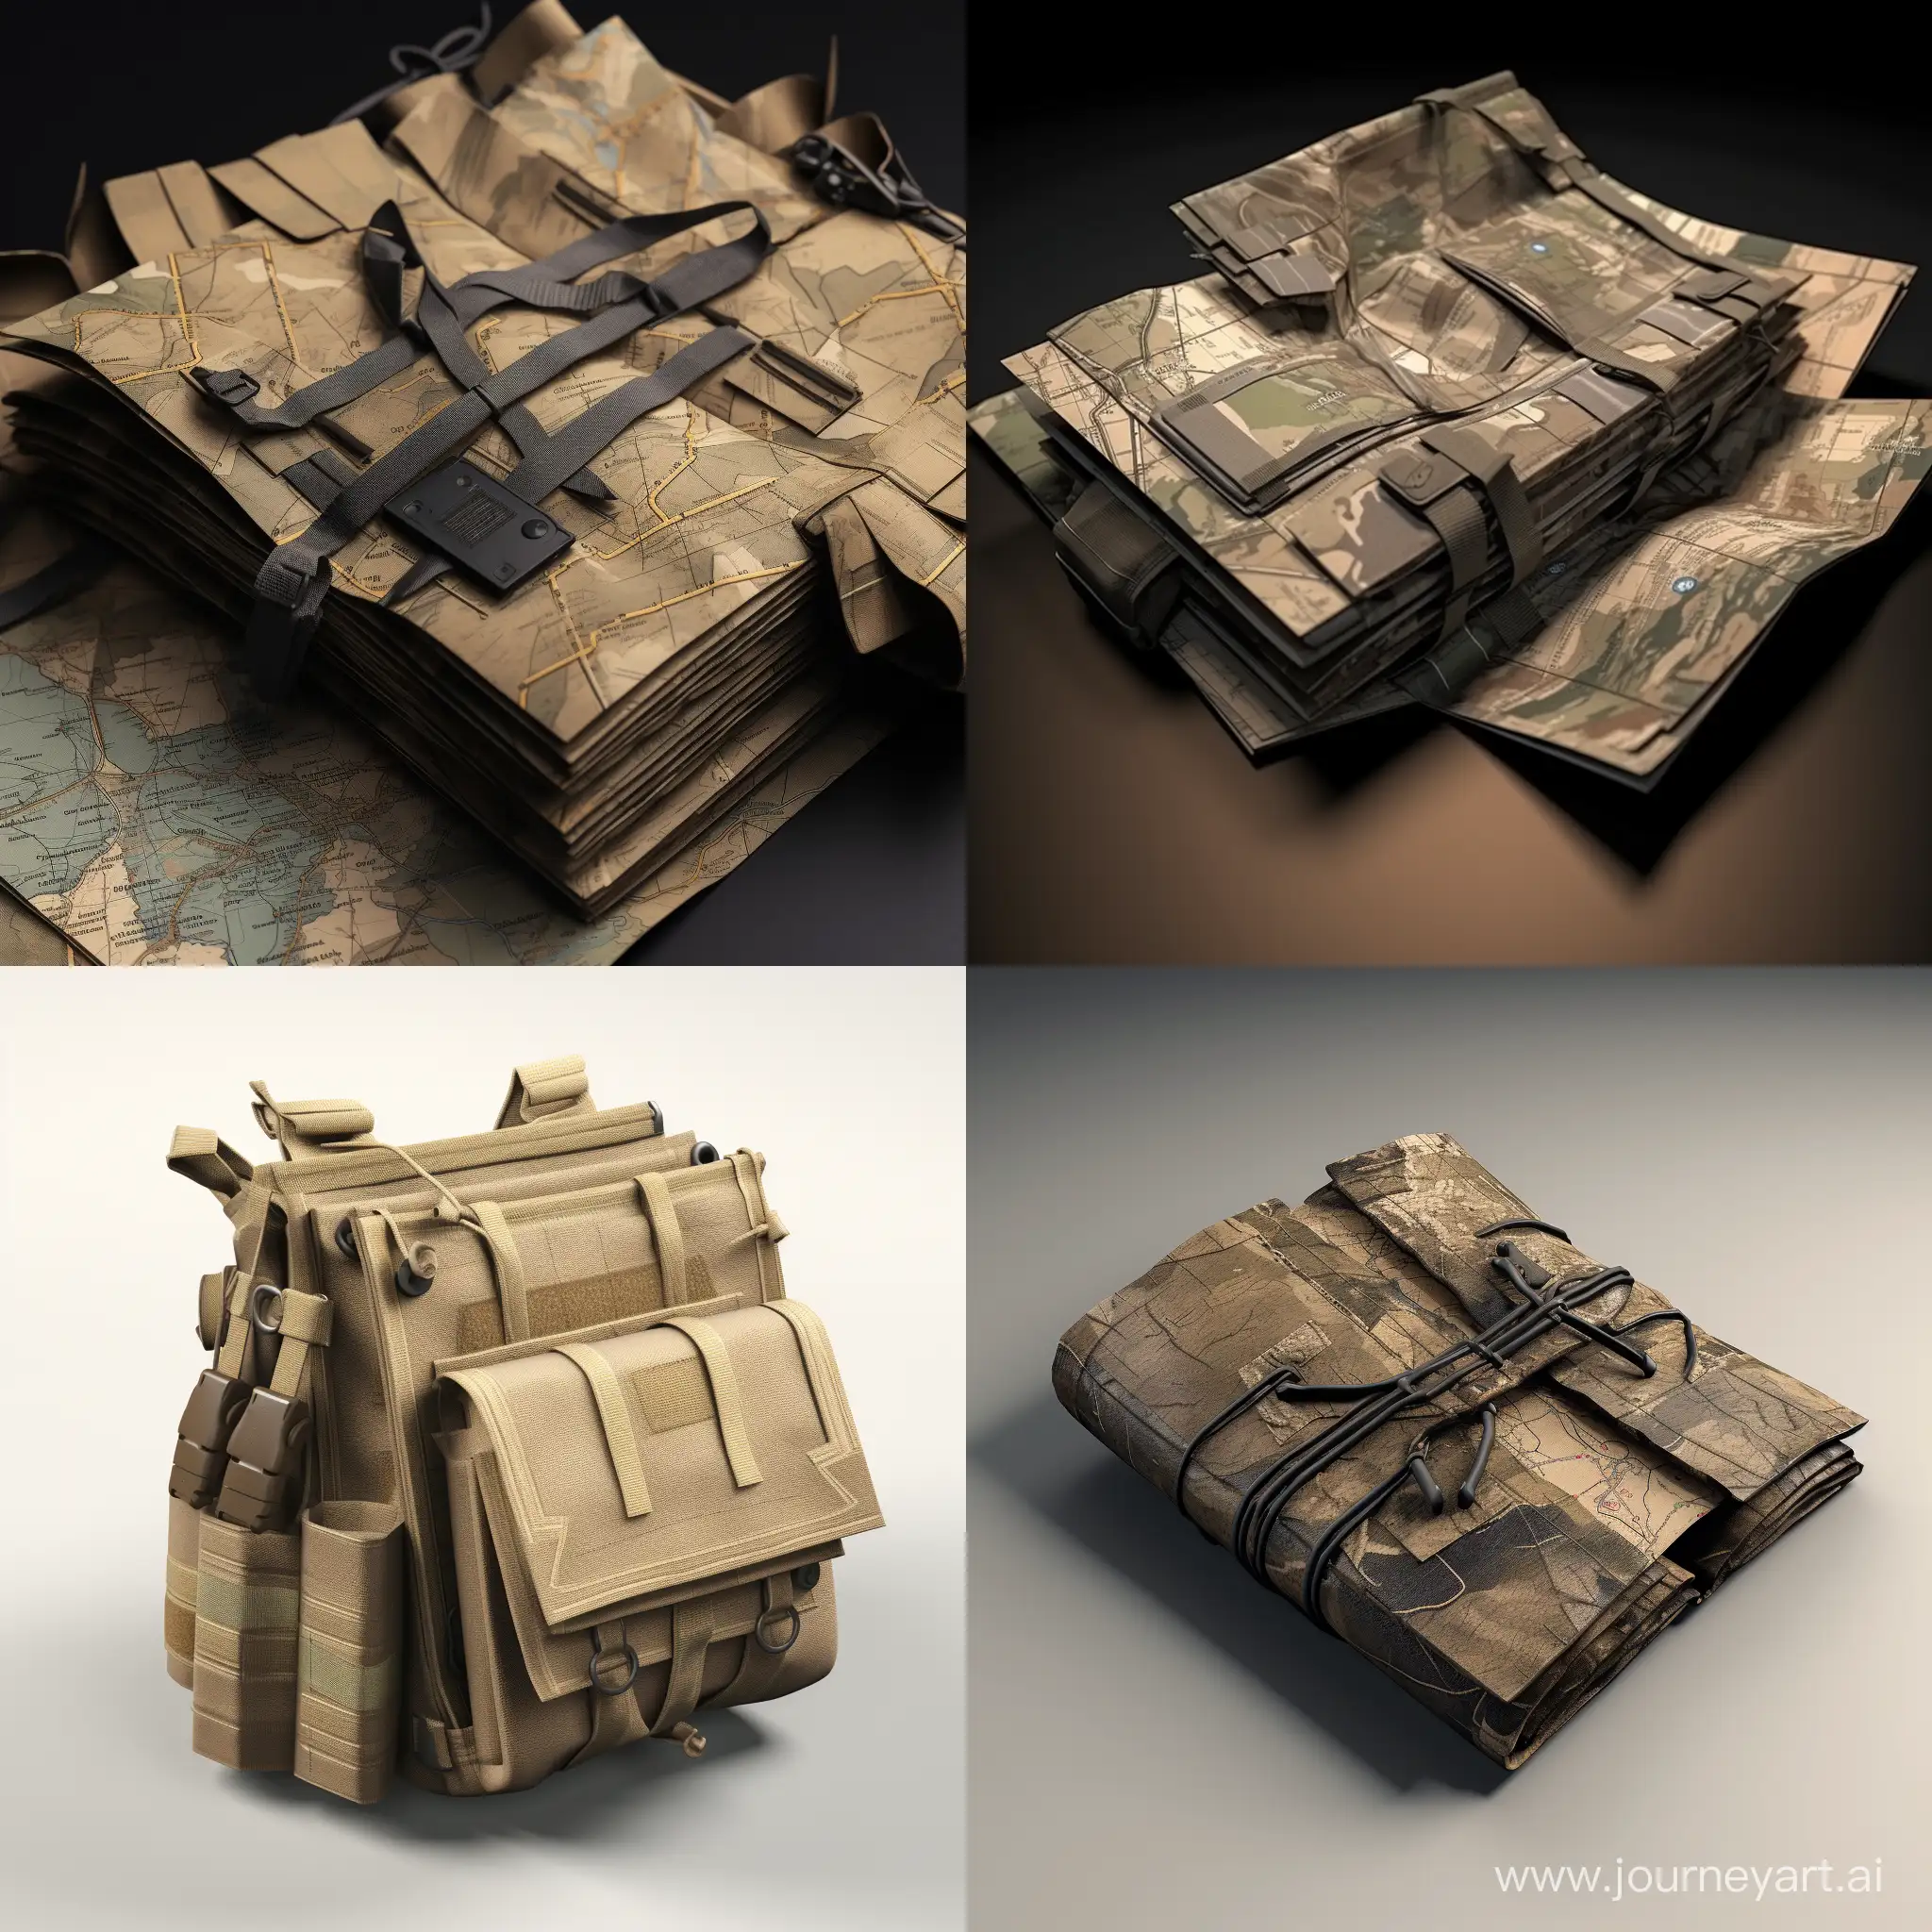 Realistic-3D-Render-of-Old-Military-Maps-in-Isometric-Tactical-Pouch